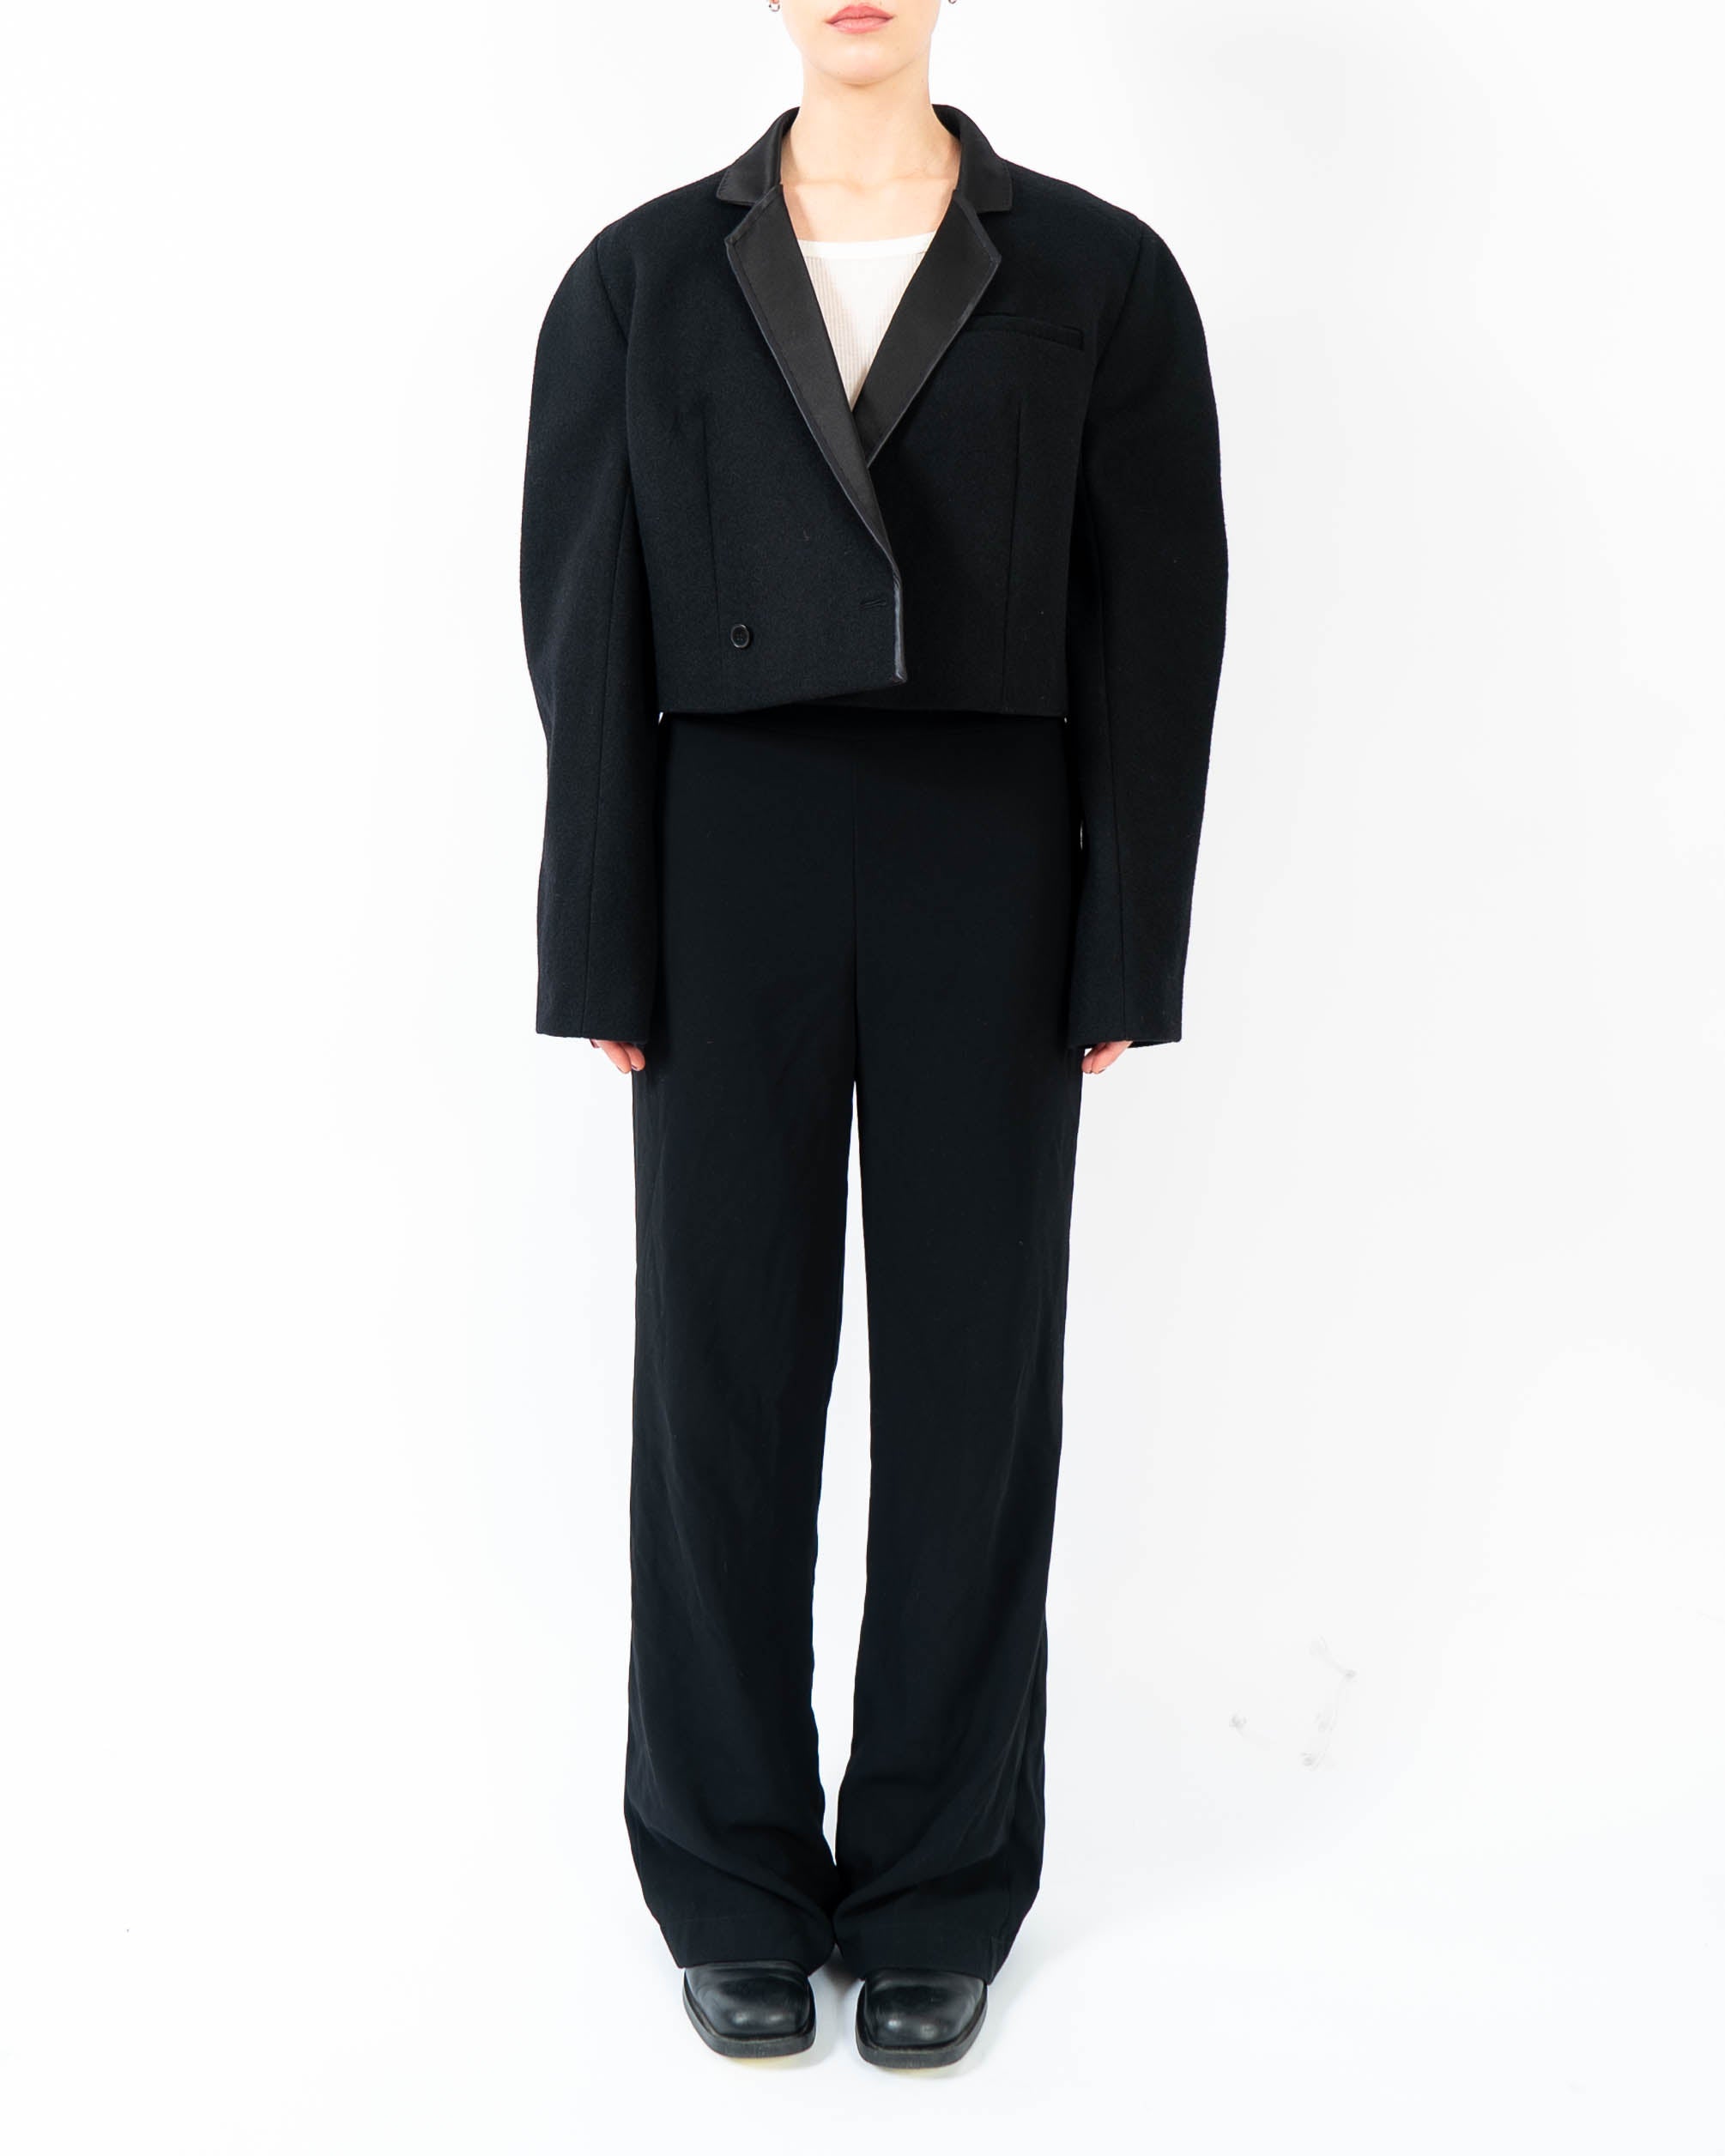 FW19 Cropped Overcoat in Black Wool with Silk Satin Collar